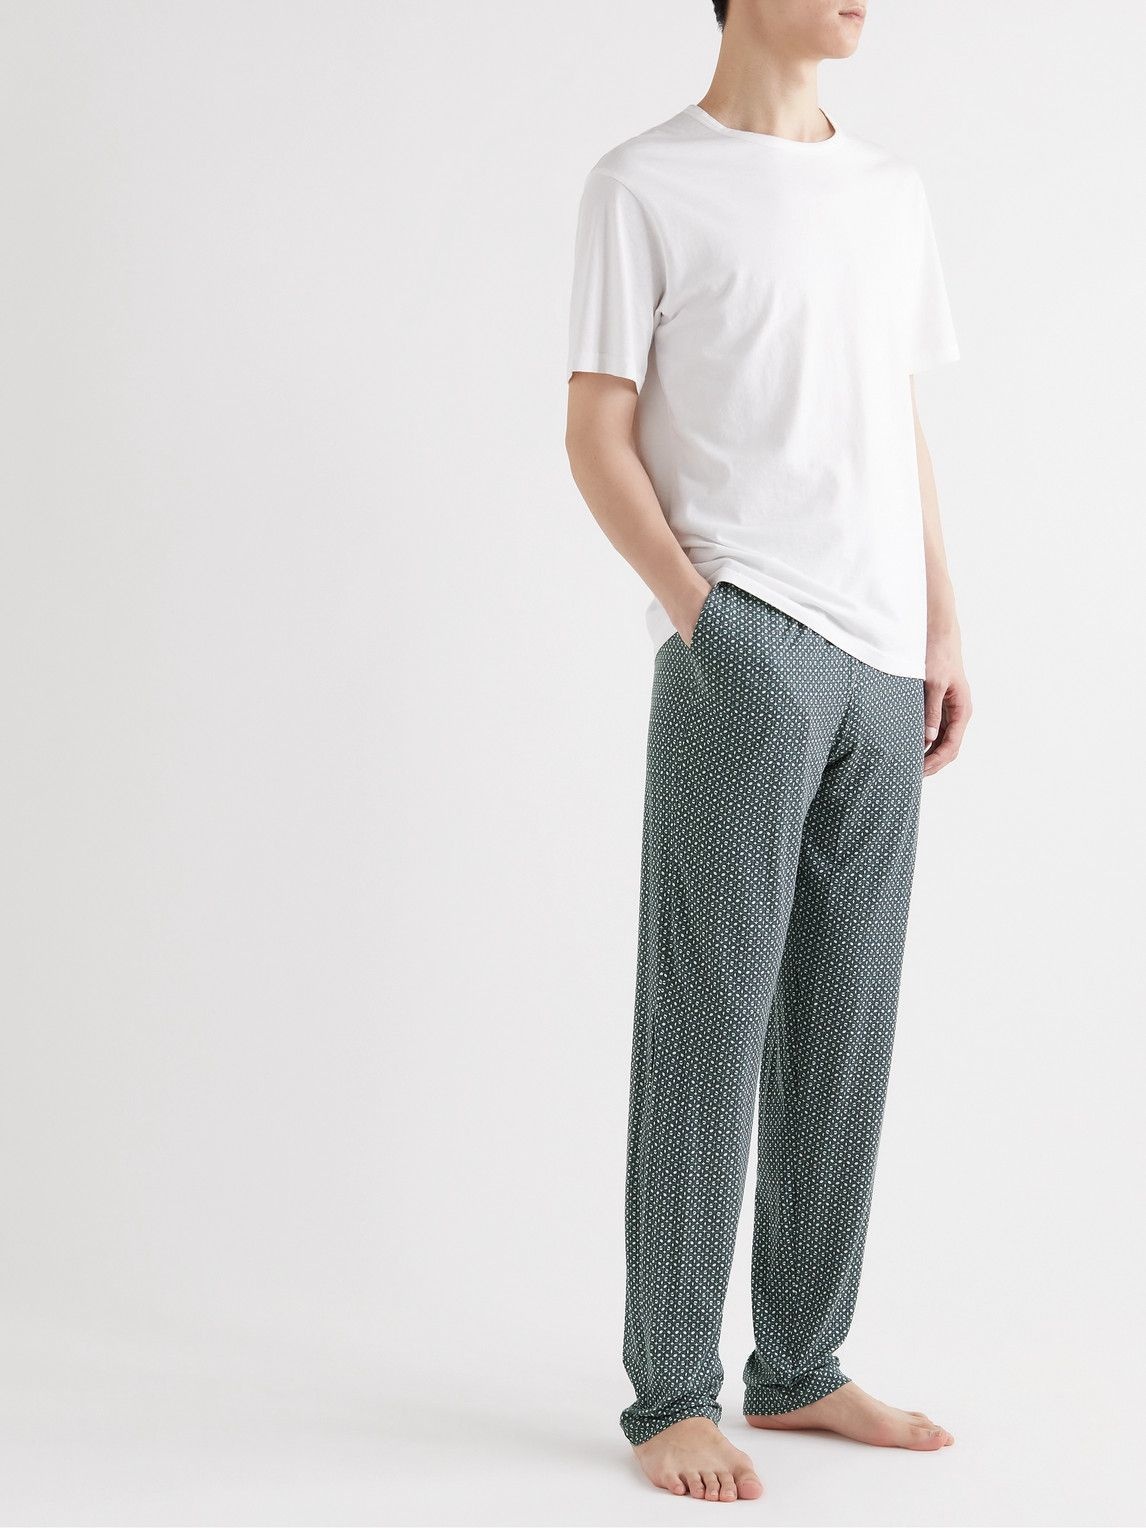 Top more than 179 patterned jersey trousers best